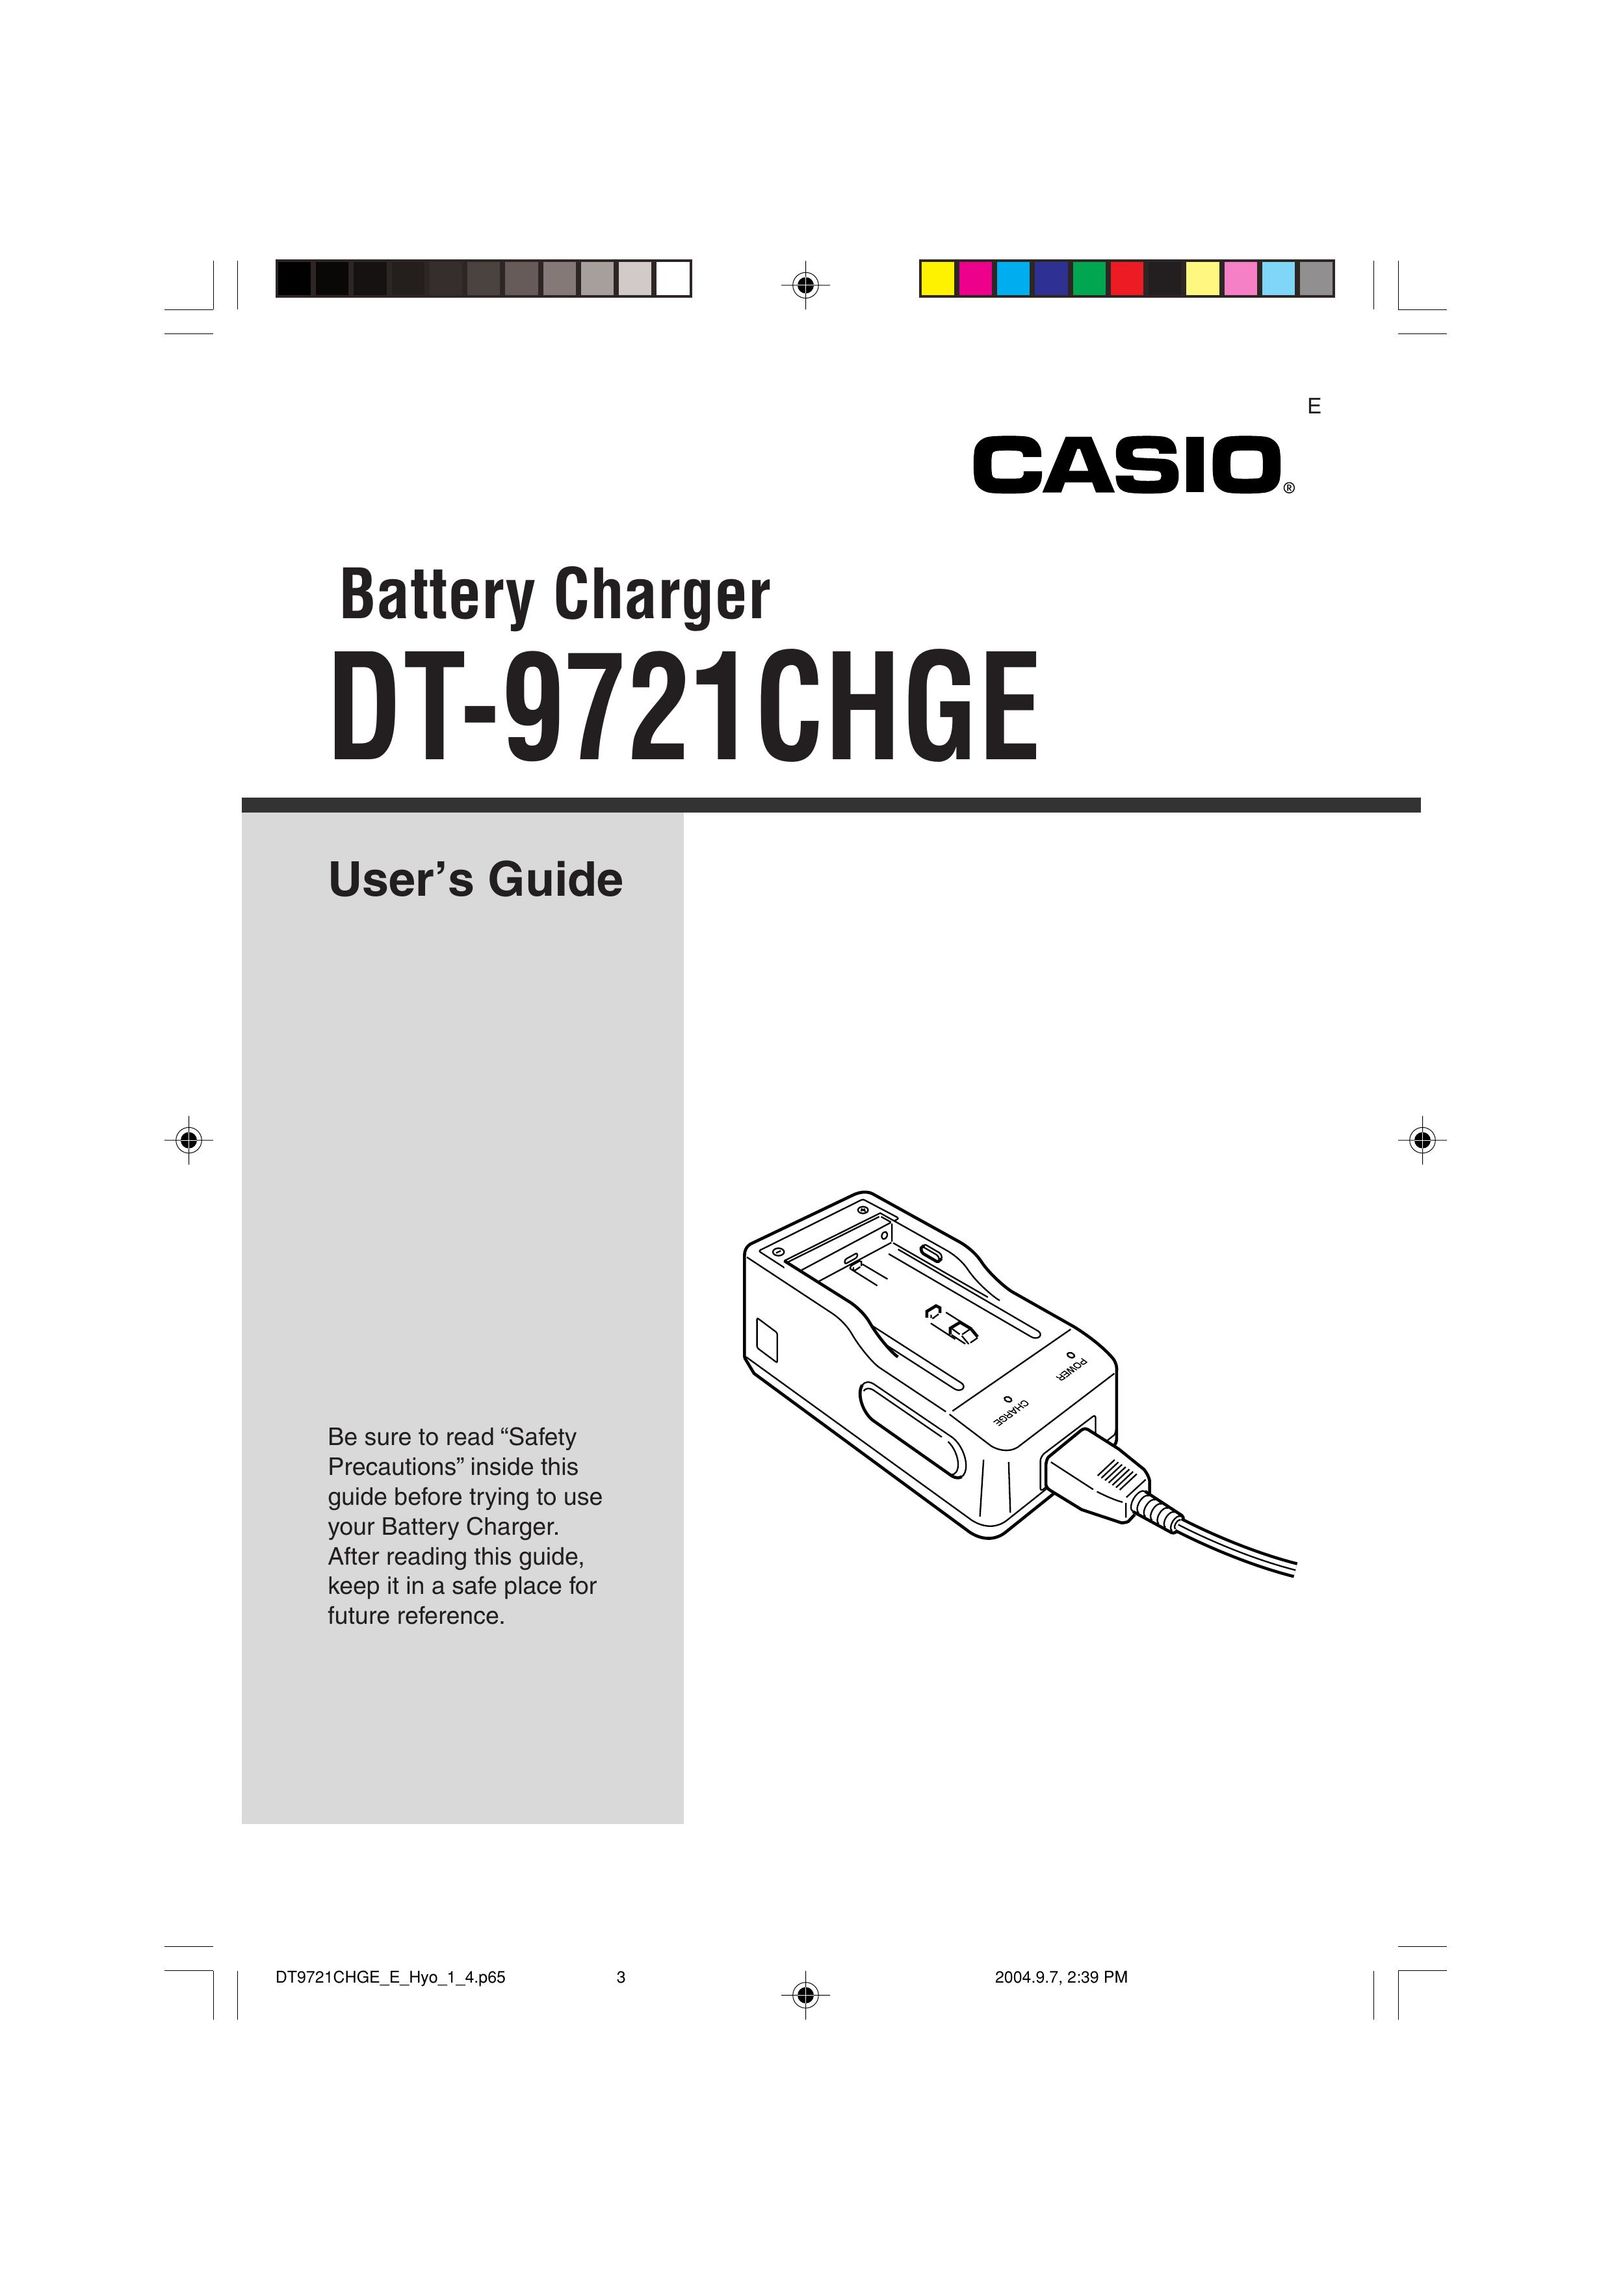 Casio DT-9721CHGE Battery Charger User Manual